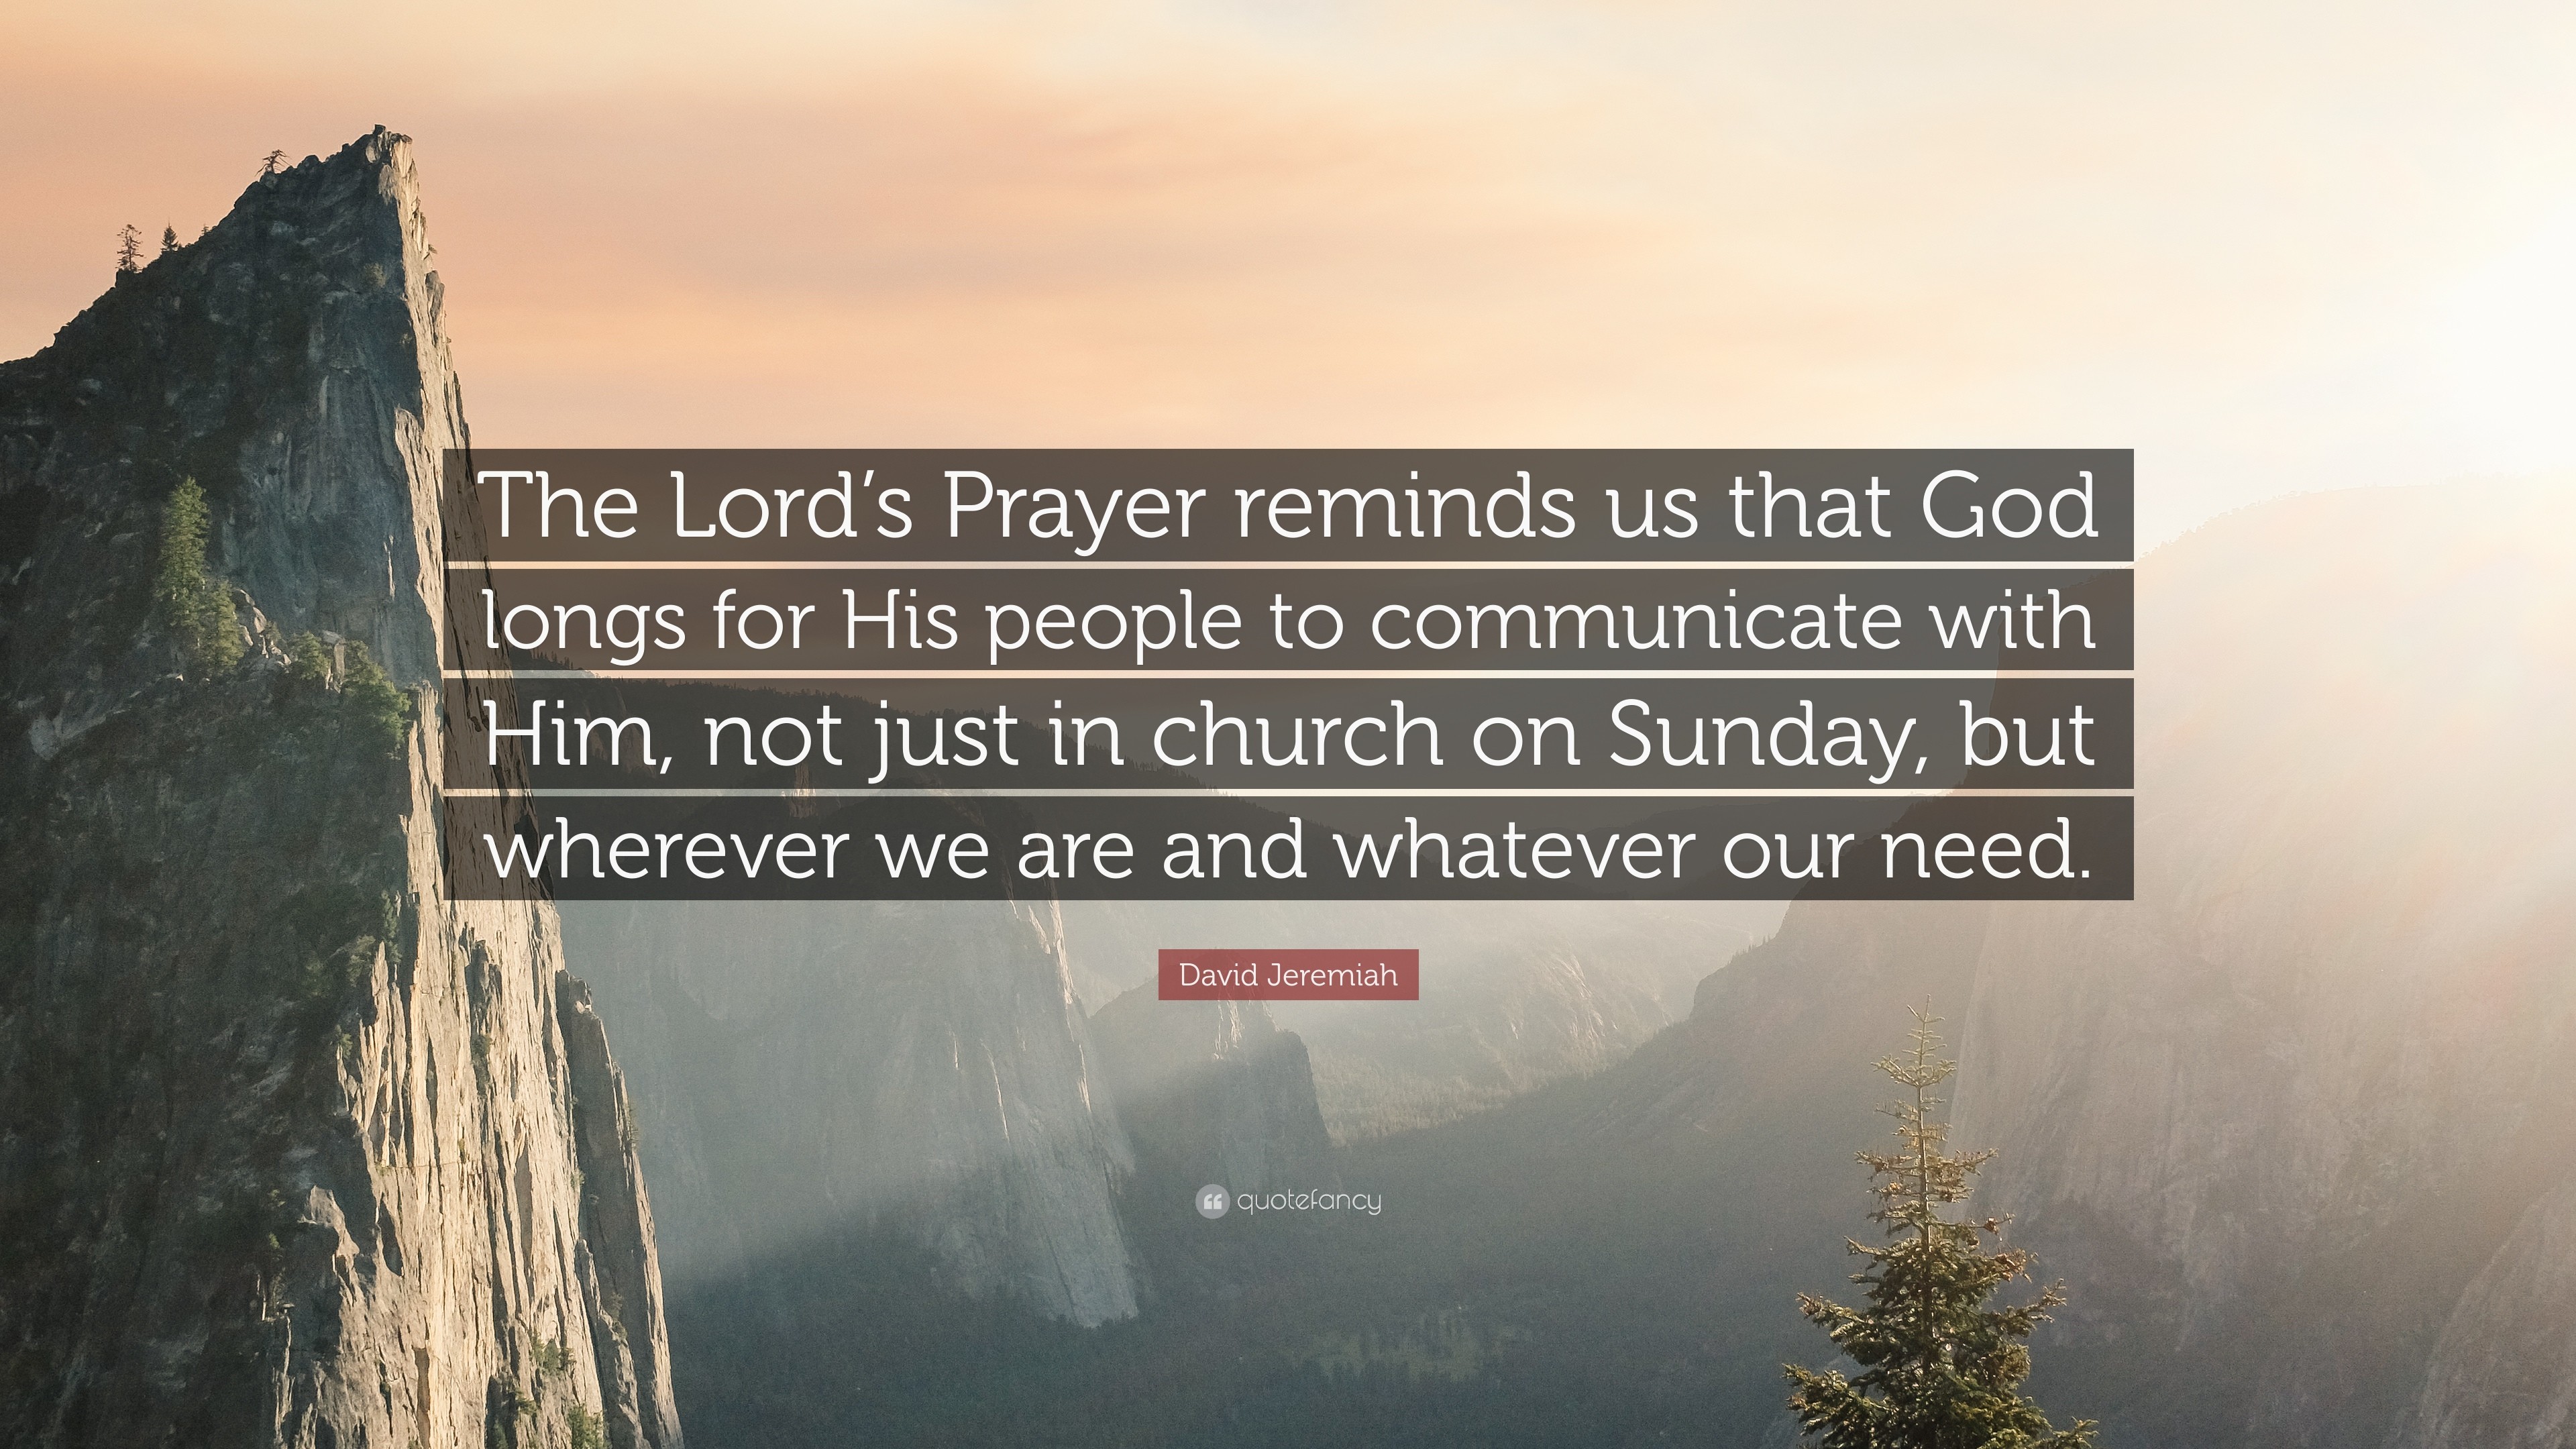 3840x2160 David Jeremiah Quote: “The Lord's Prayer reminds us that God longs for His  people